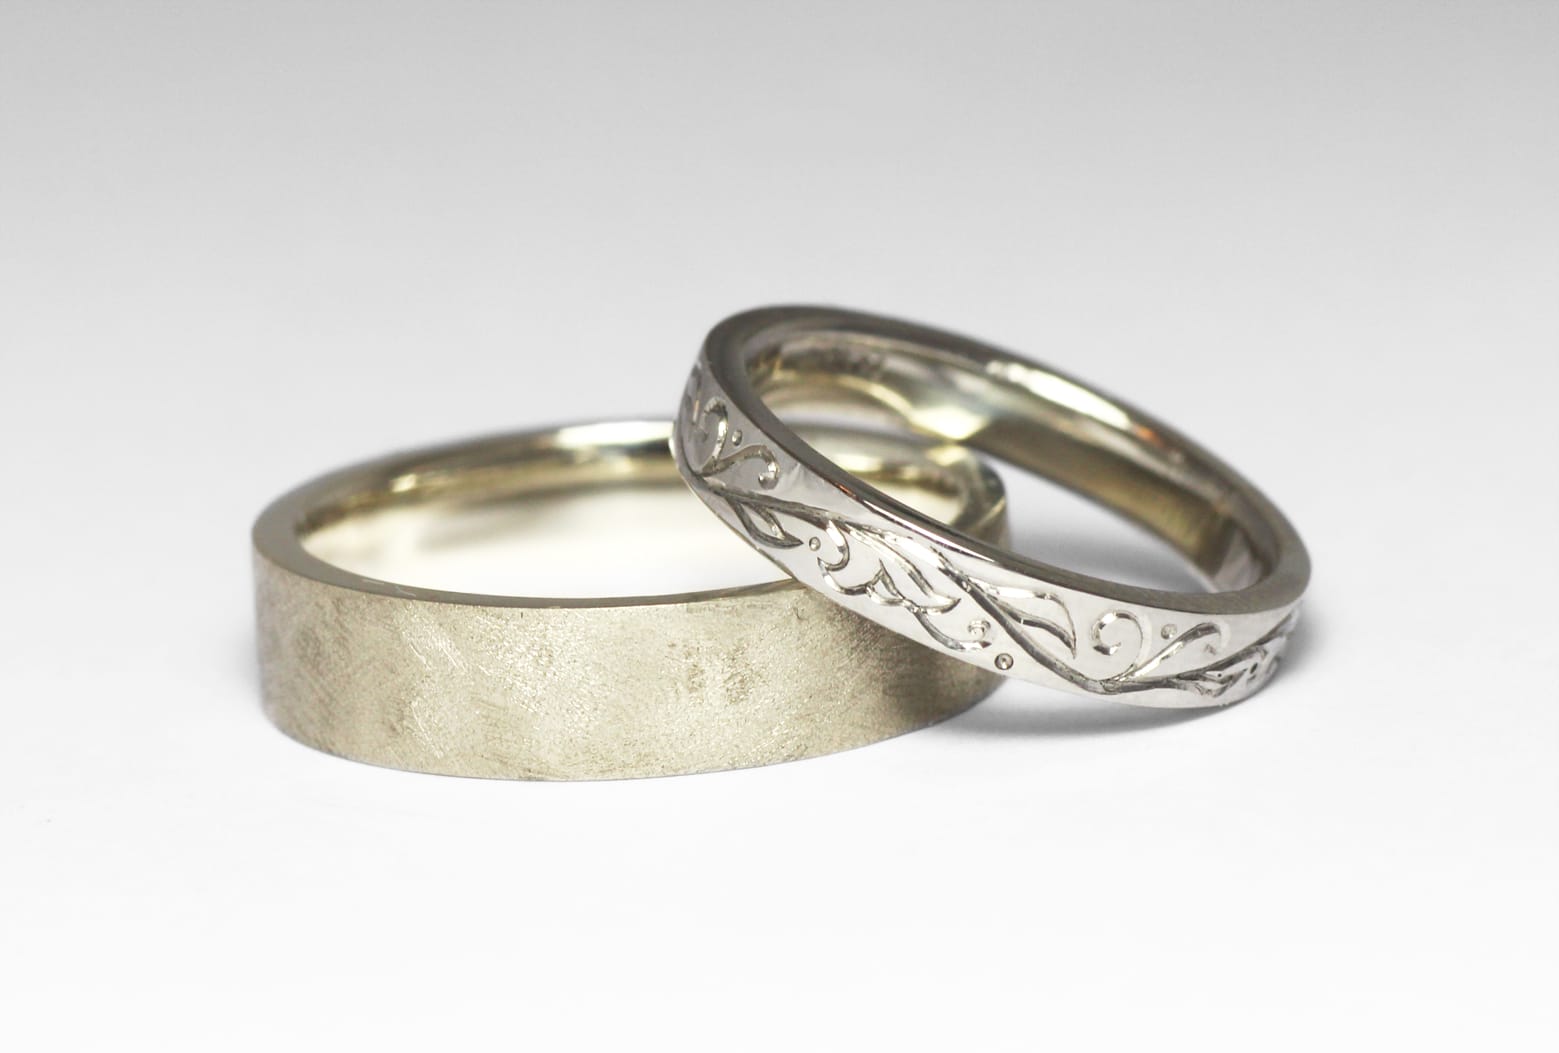 Platinum and gold in bespoke designs by Zoe Pook Jewellery